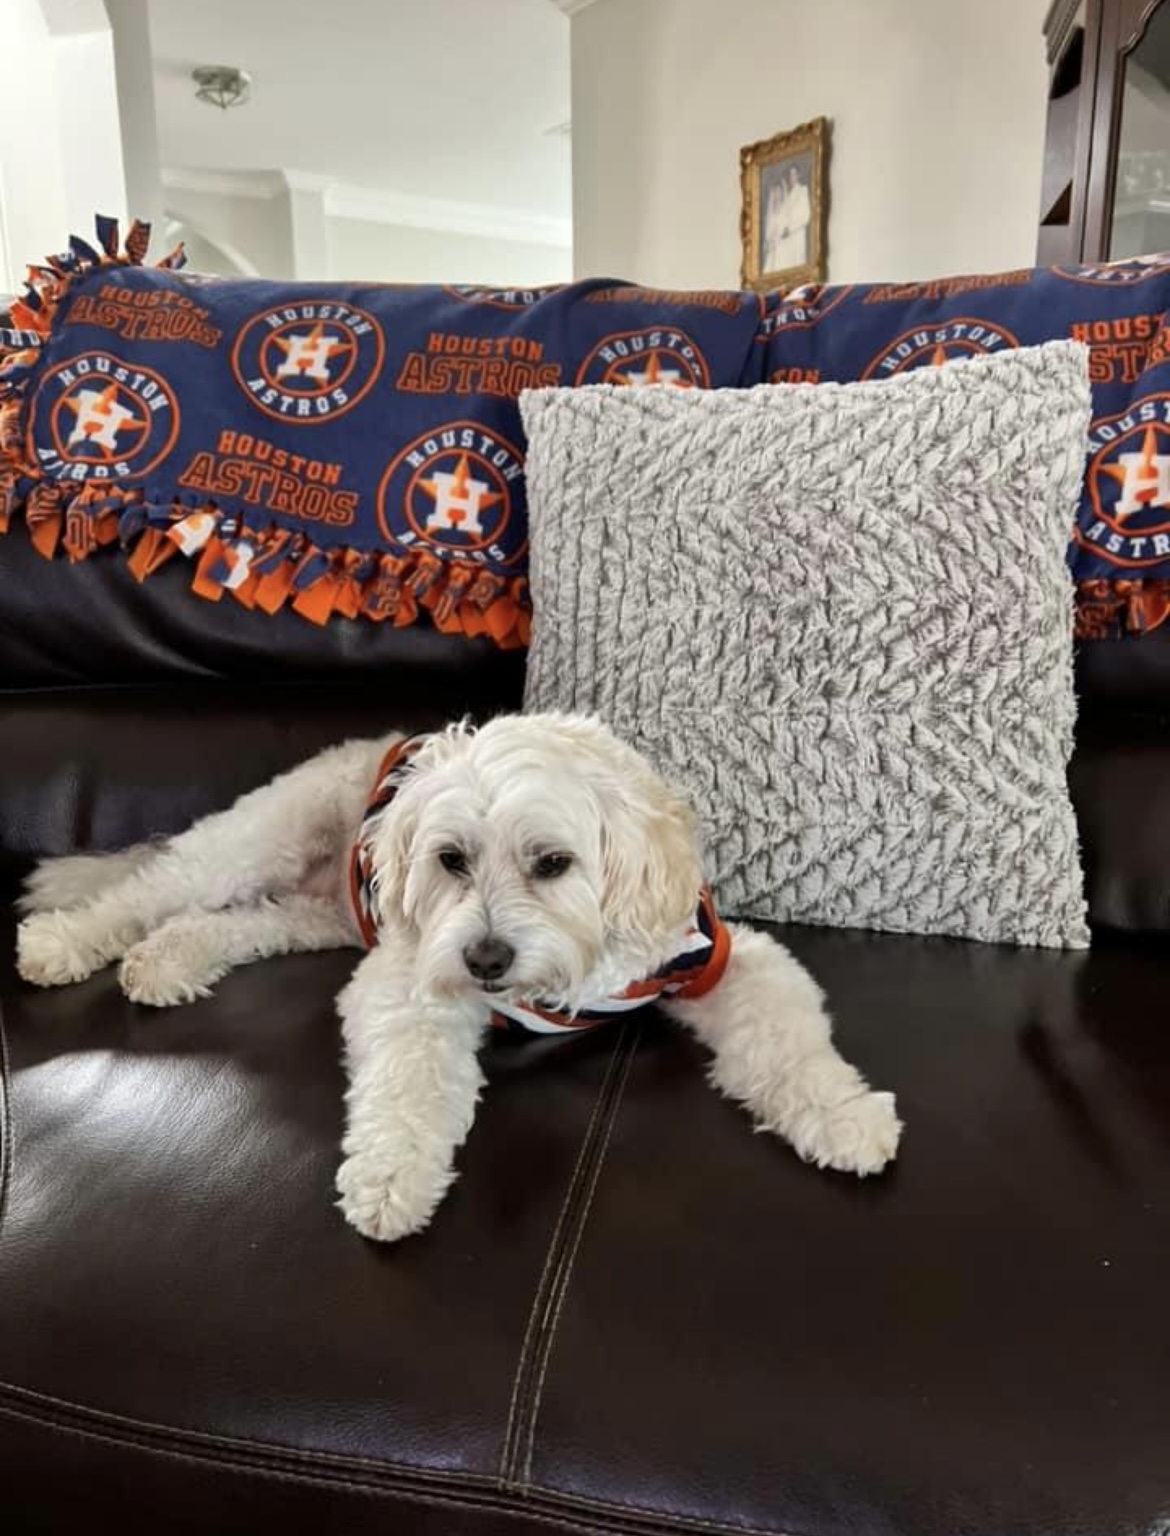 Pets love the Stros! Send photos of your fur baby supporting the Astros  through Click2Pins